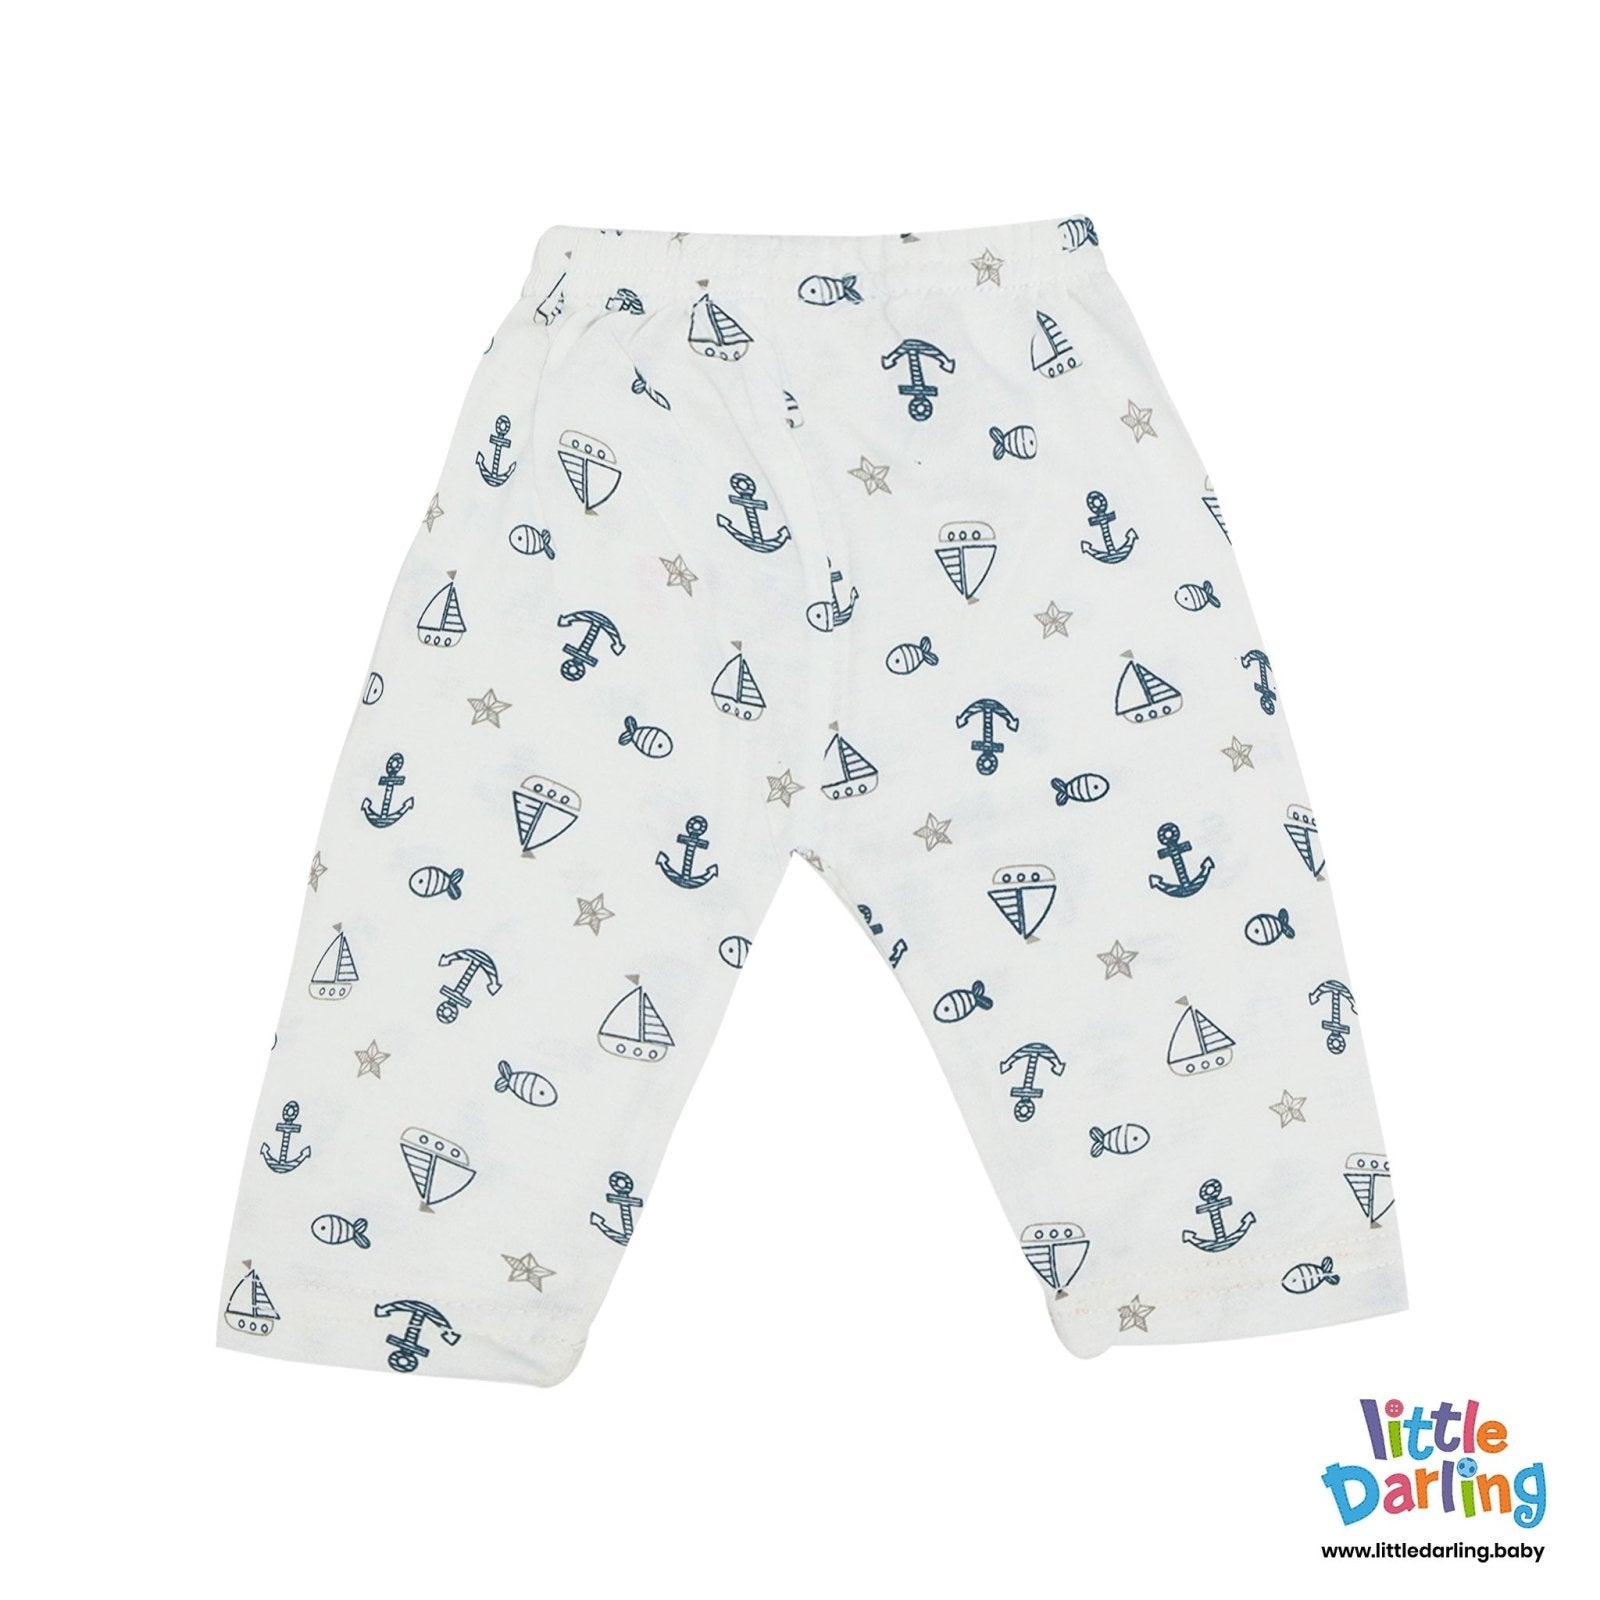 Baby Pajamas pk of 2 Anchor Print by Little Darling